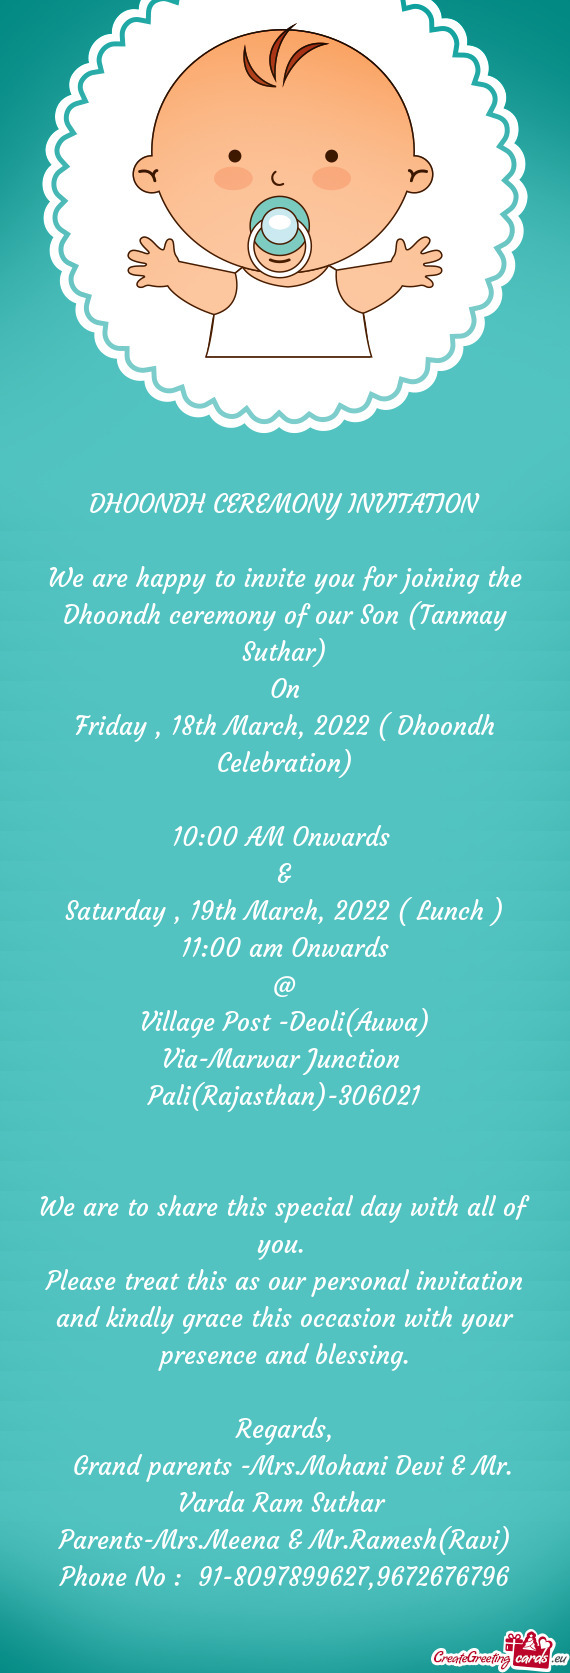 We are happy to invite you for joining the Dhoondh ceremony of our Son (Tanmay Suthar)